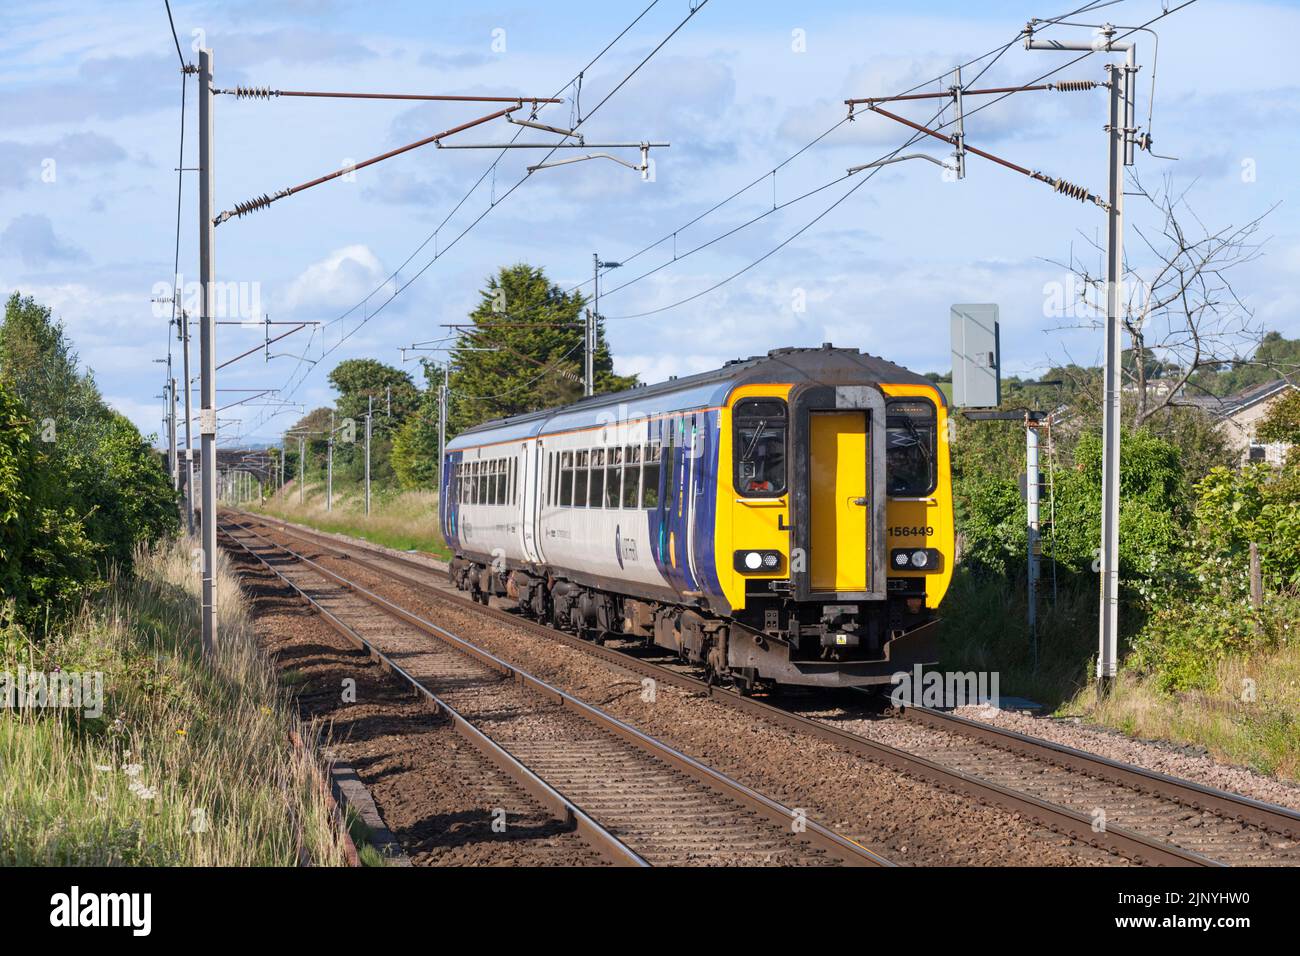 Northern Rail class 156 diesel multiple unit train on the electrified west coast mainline Stock Photo